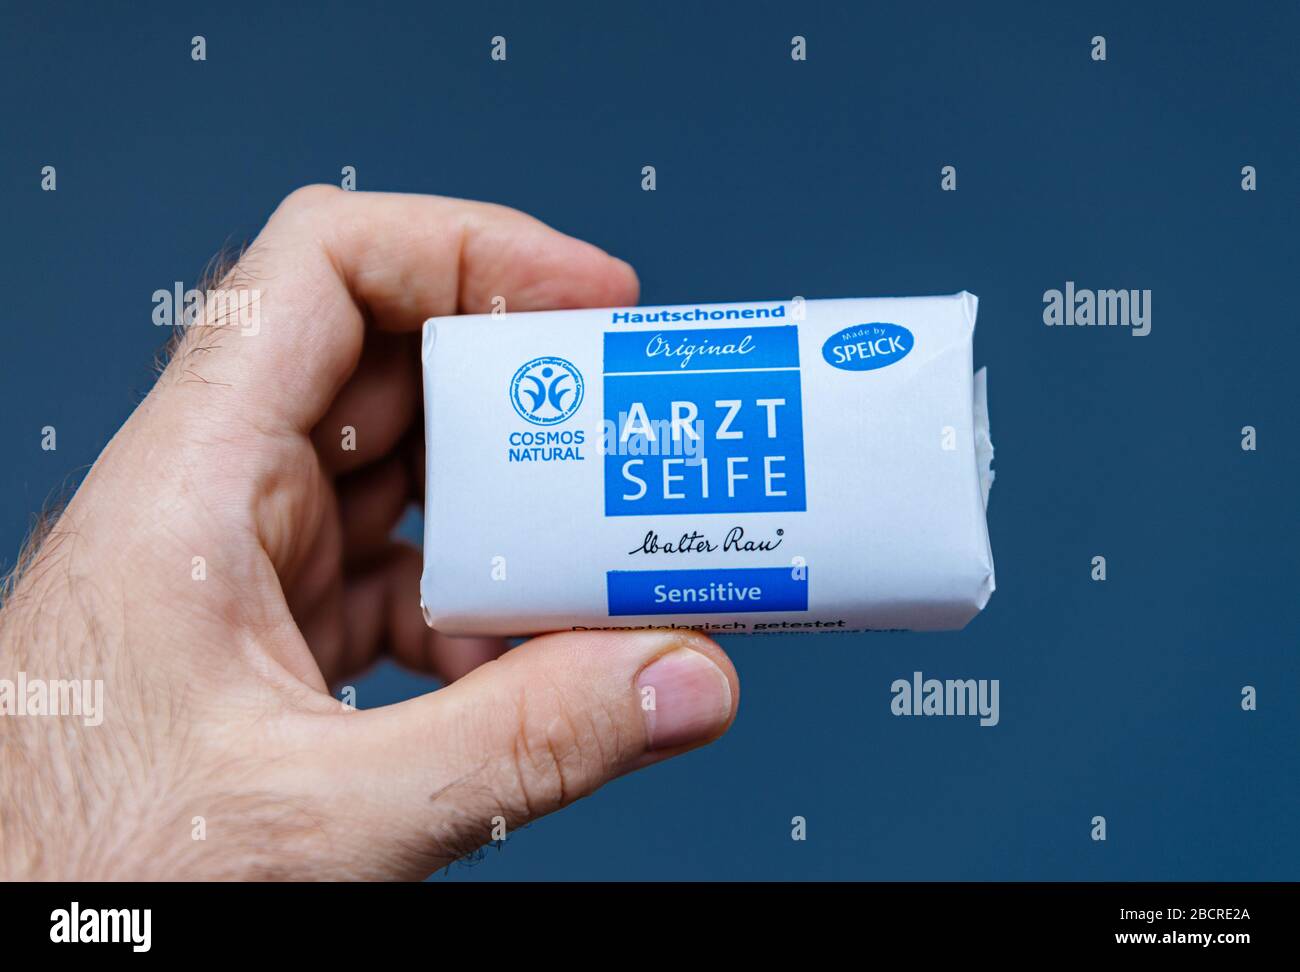 Paris, France - Aug 1, 2019: Male hand holding original Arzt Seife soap bar  manufactured by Speick for sensitive skin Stock Photo - Alamy